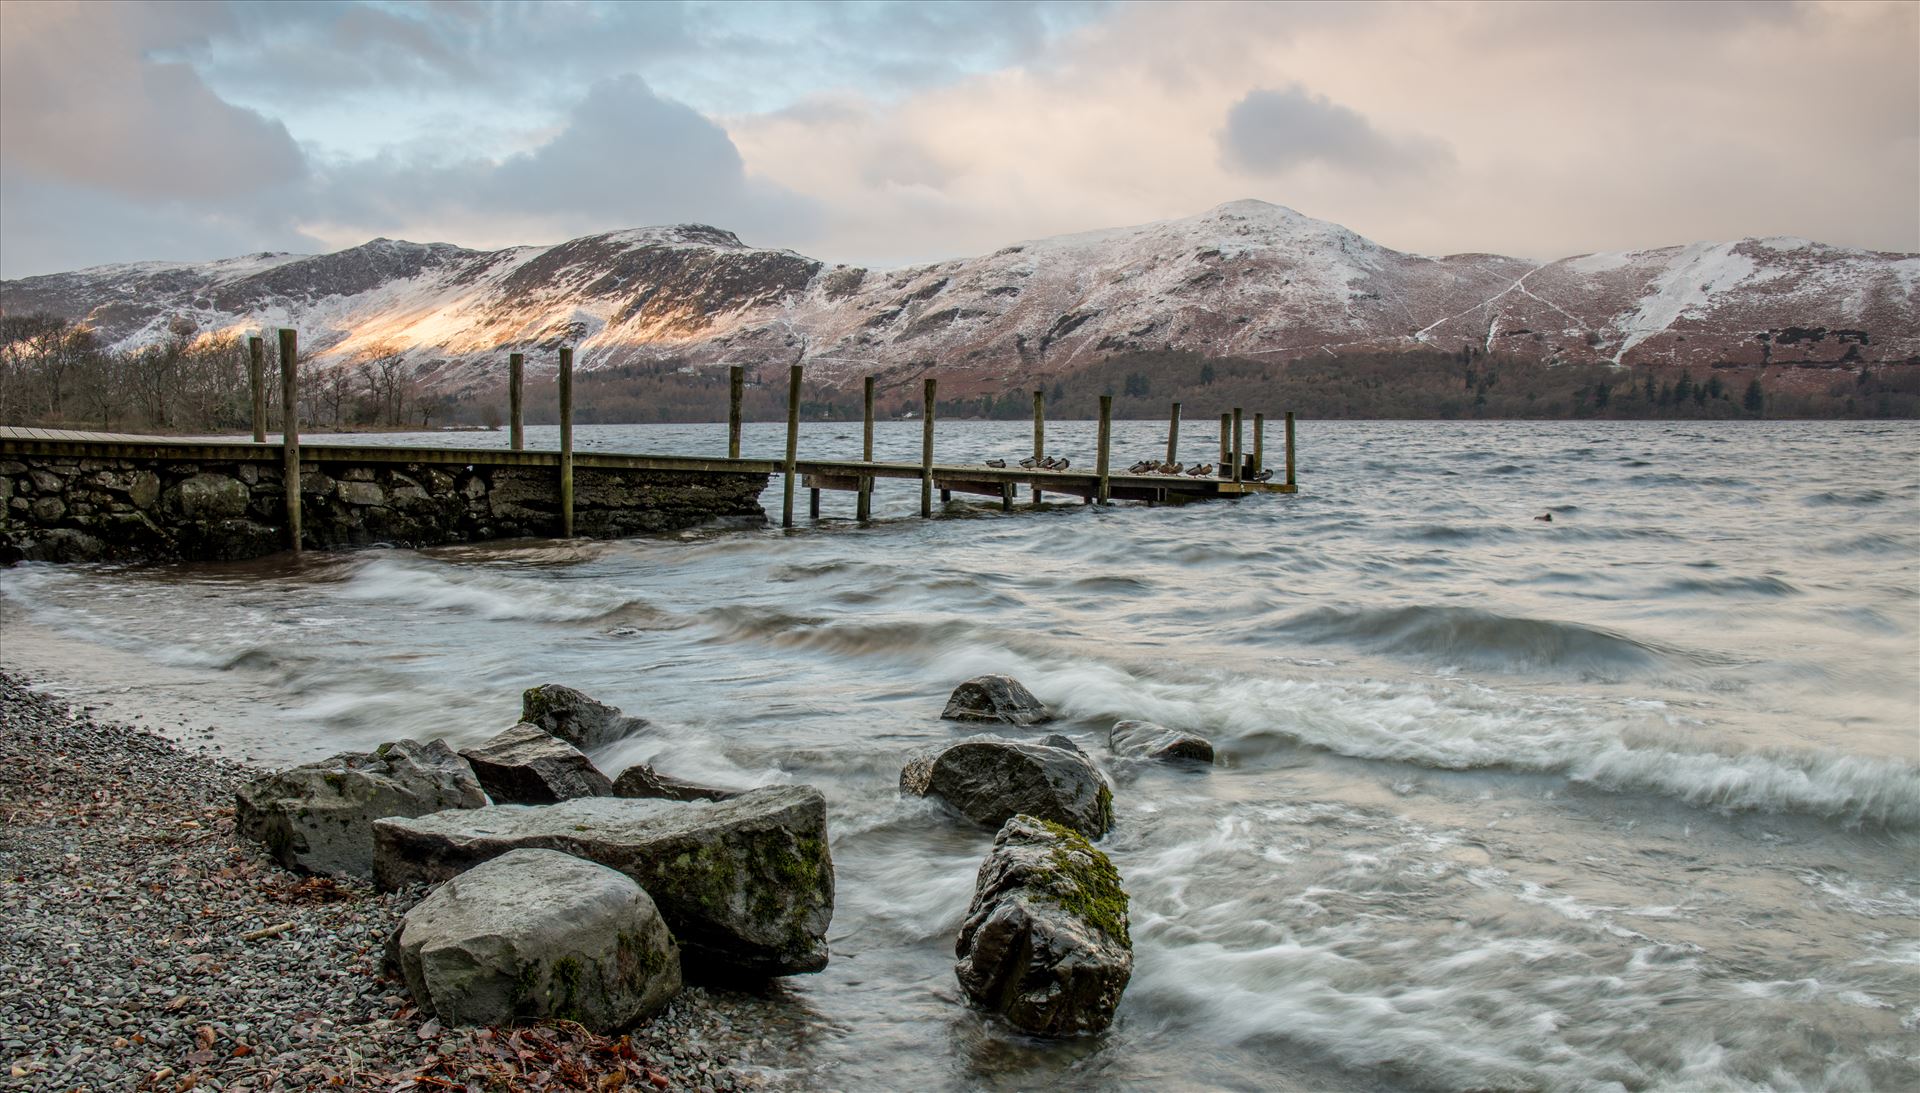 Ashness Jetty, Derwentwater - This beautiful jetty sits on the eastern shore of Lake Derwentwater, nr Keswick & Catbells, in the background, is being lit by the morning sun. by philreay